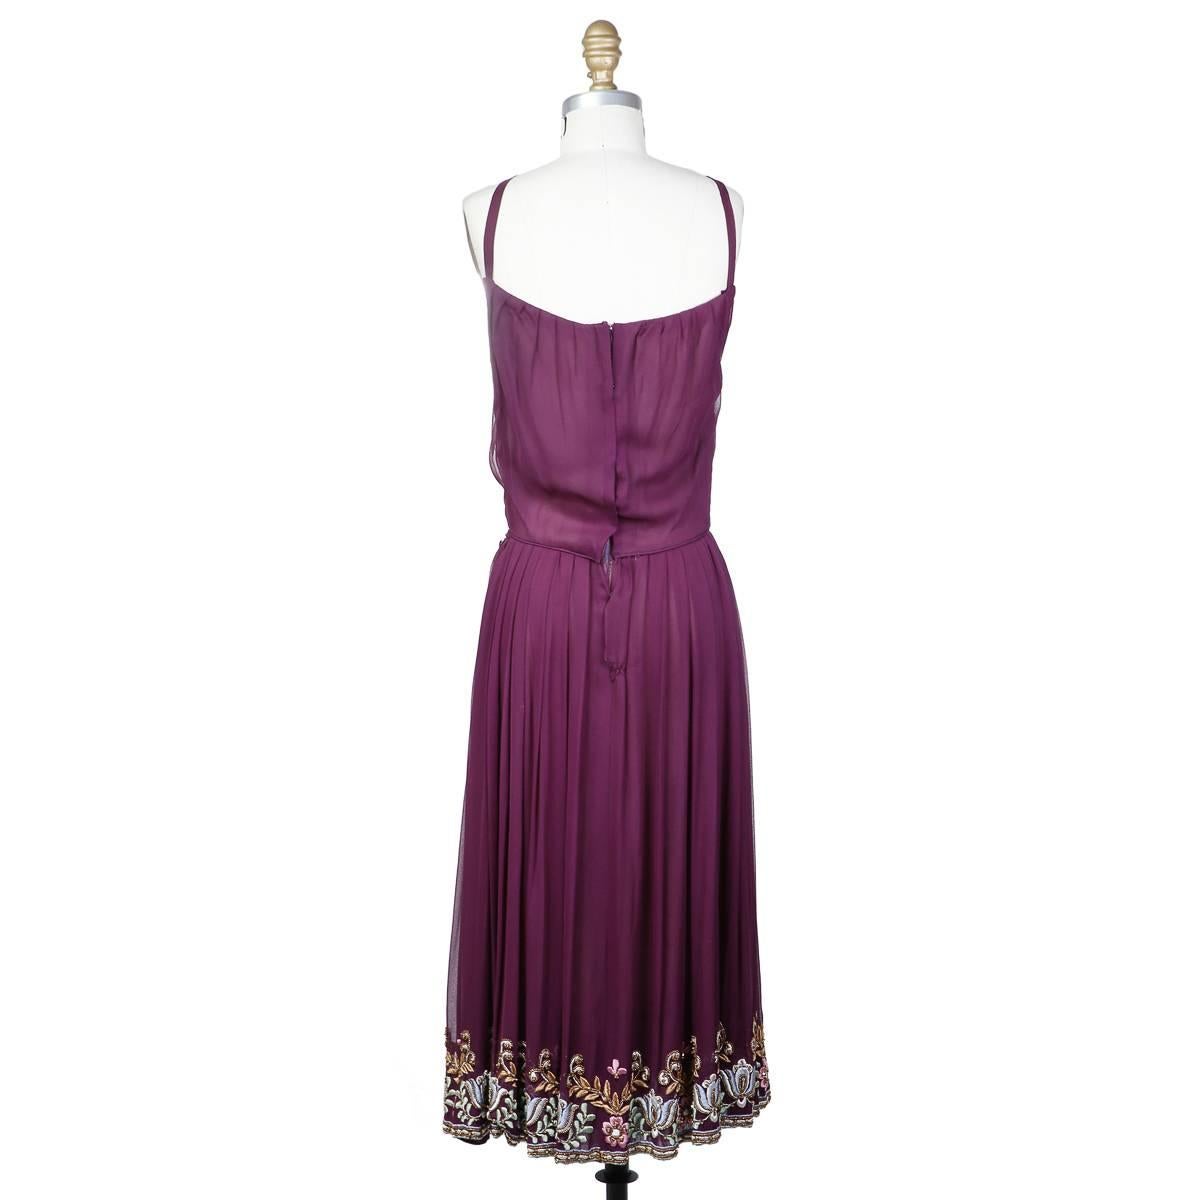 This is a halter dress by Christian Dior c. 1980s.  It is made from a purple chiffon and features a floral beaded and embroidered design along the bottom hem.  It includes an attached slip lining with a zipper and snap closures on the outside. 